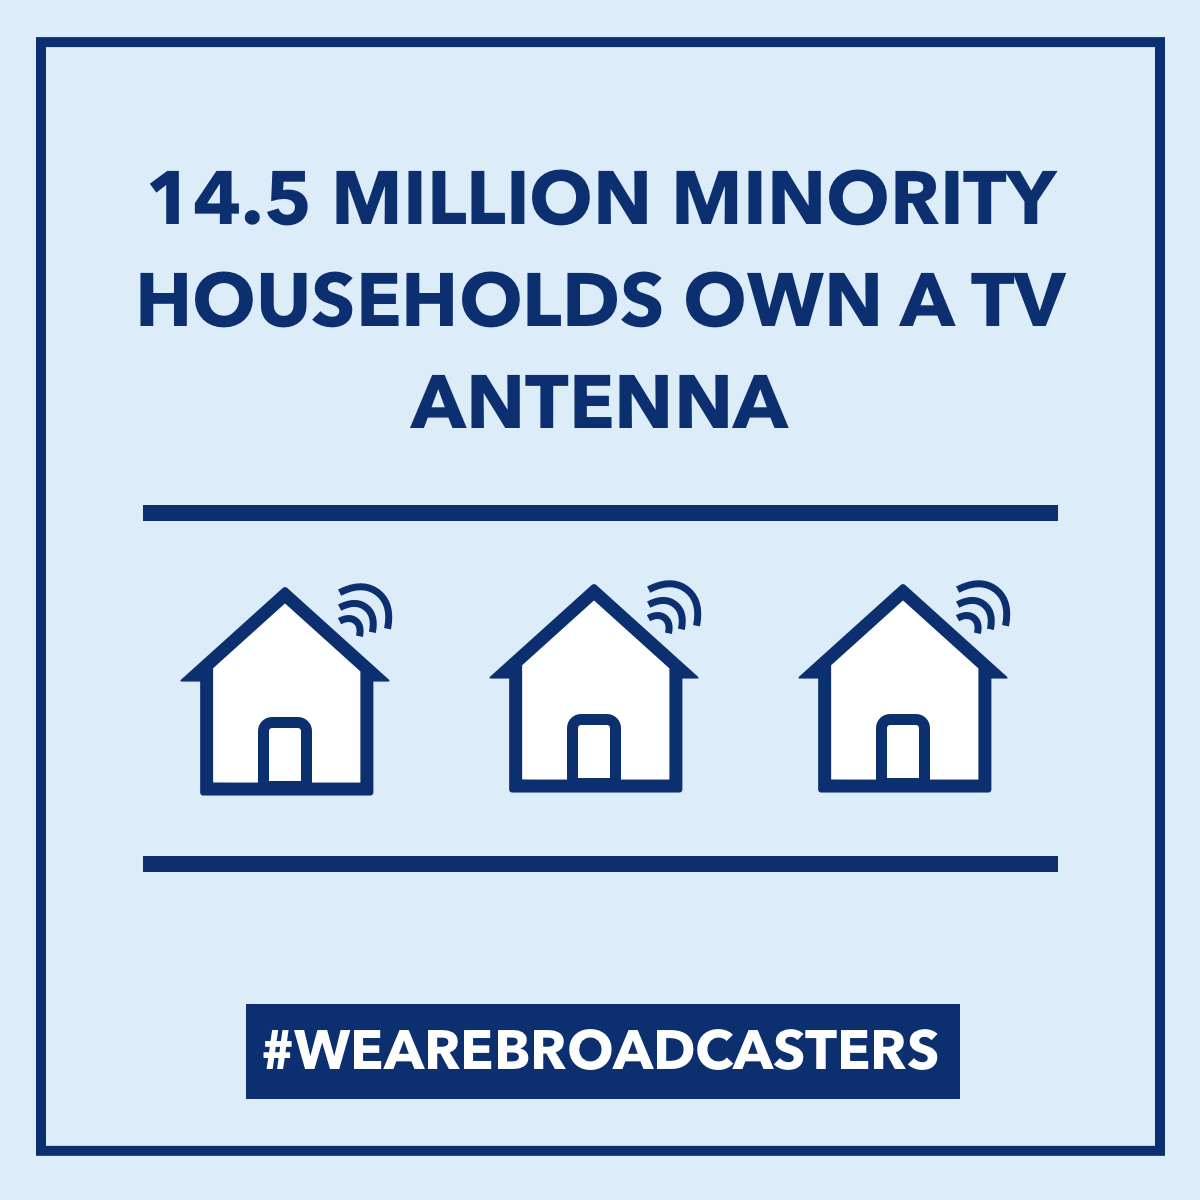 40.6% of homes who rely on free TV using an antenna are minority households